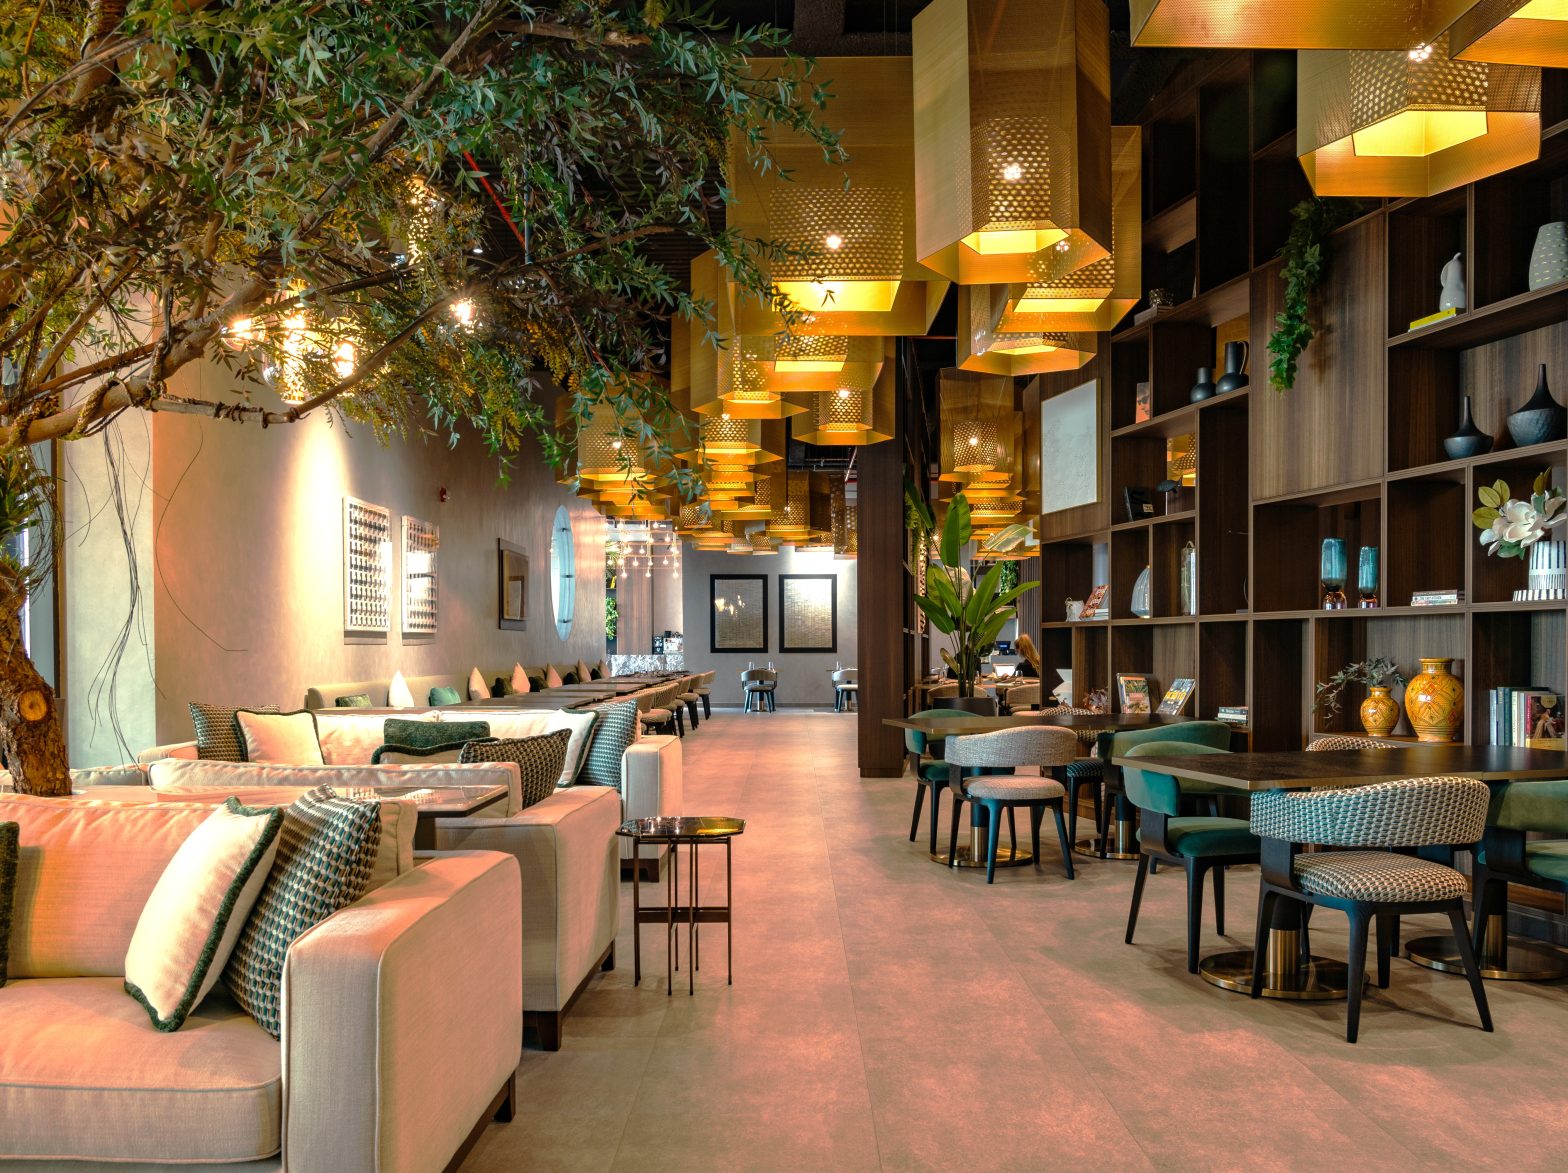 Quince: Check out this huge 9,000 sq ft restaurant in Dubai